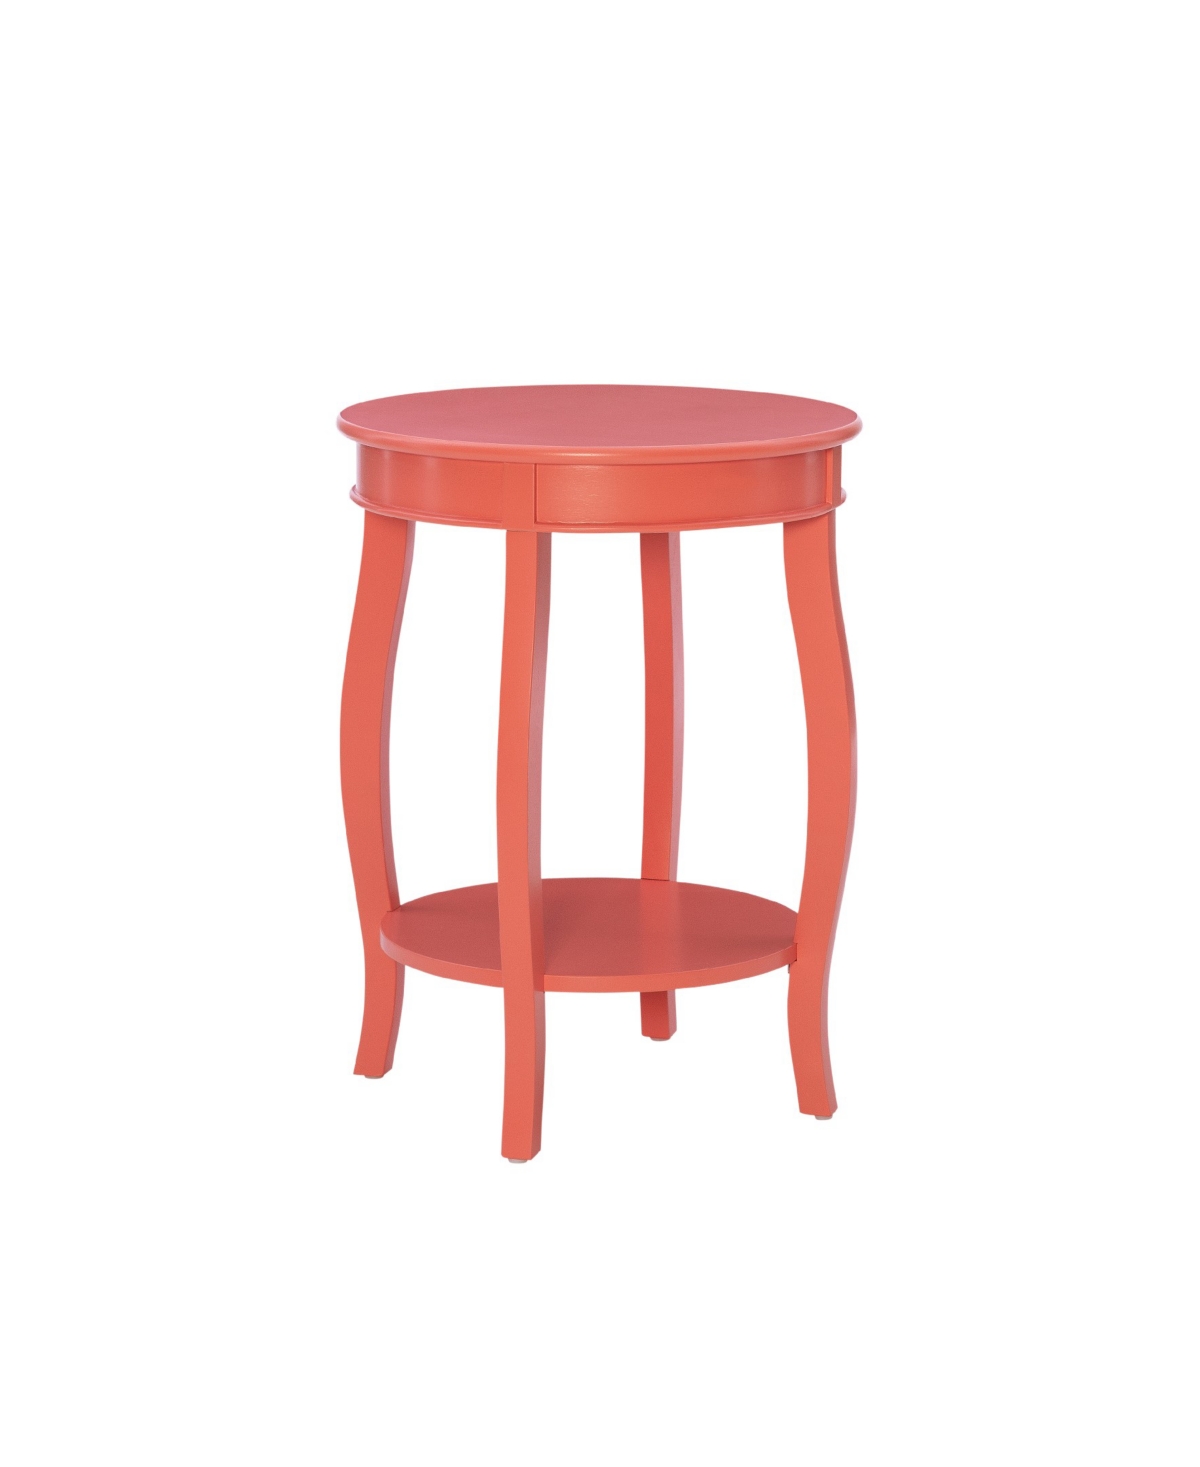 Linon Home Decor Powell Furniture Andover Round Side Table In Coral